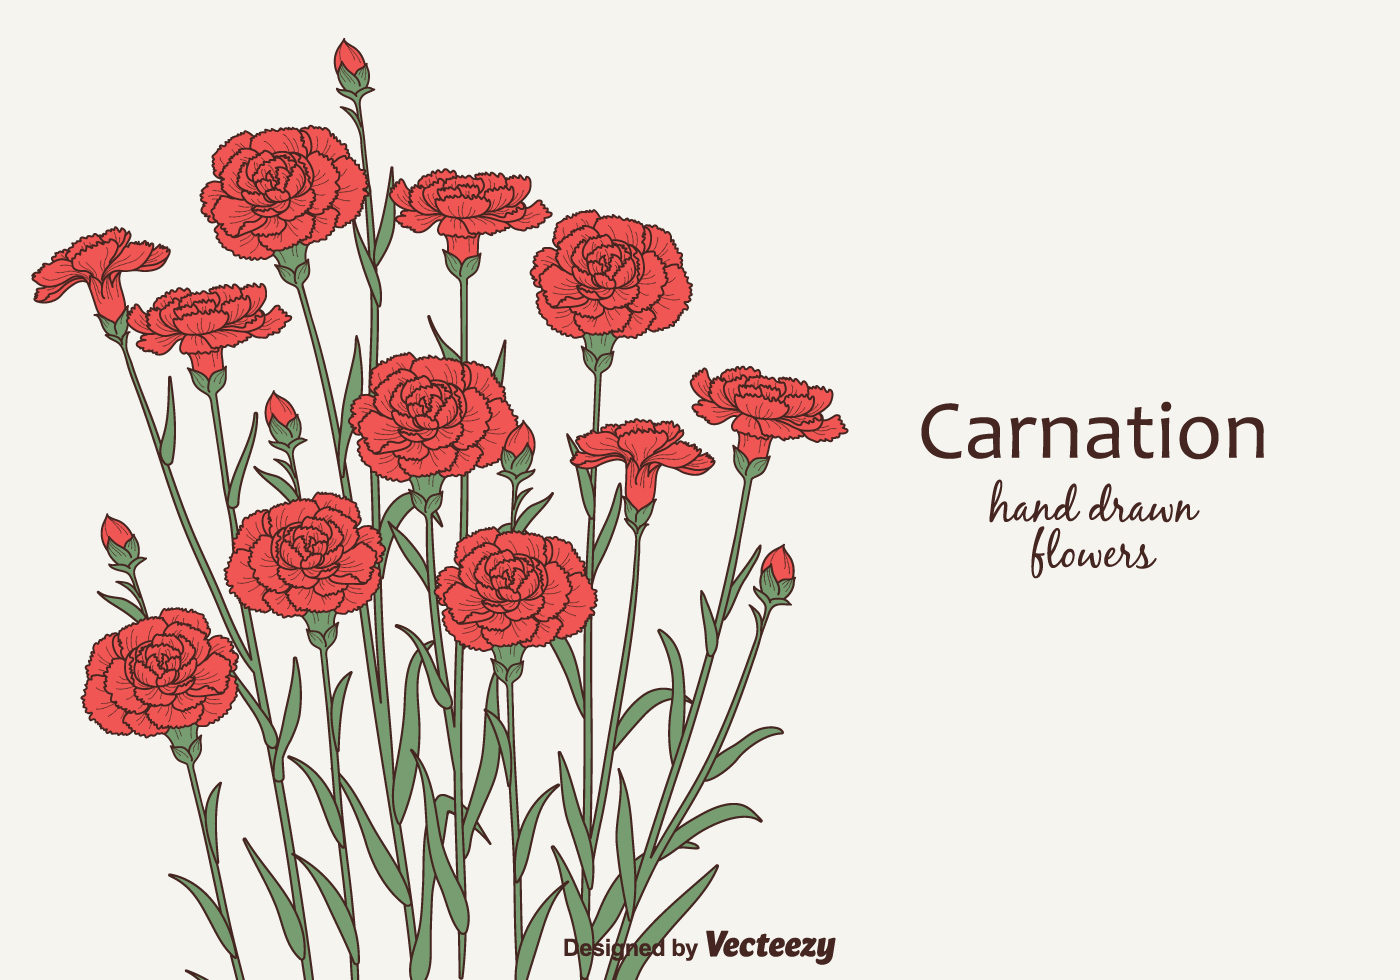 43. Found. vector images for 'Carnation'. 